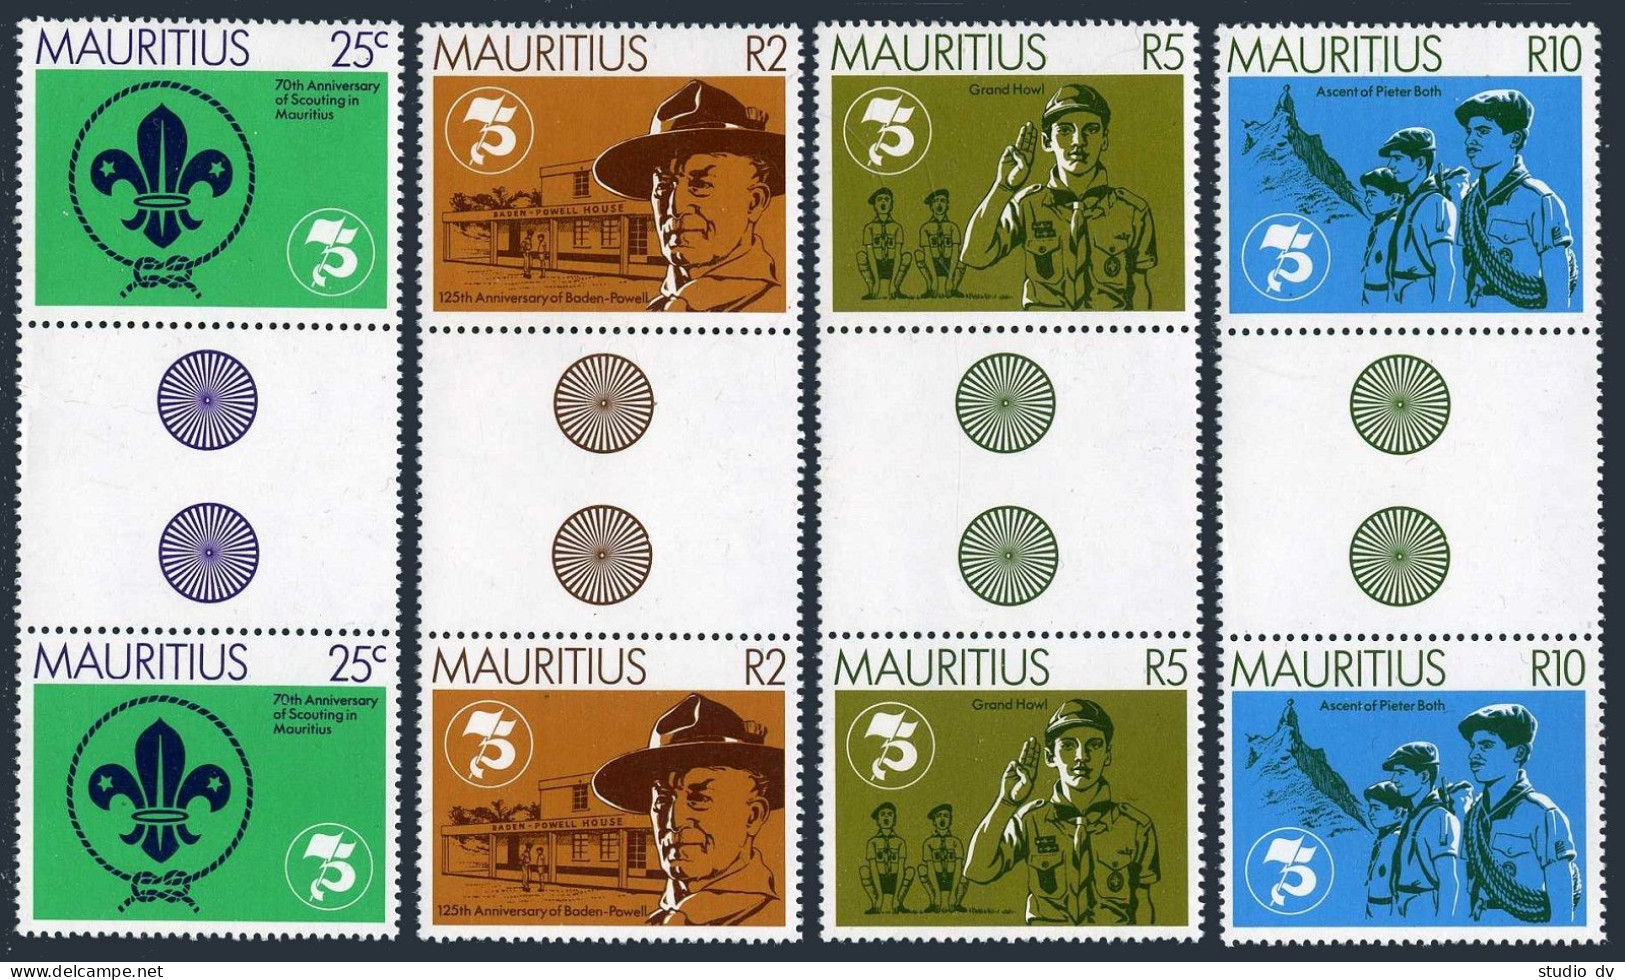 Mauritius 540-543 Gutter, MNH. Michel 536-539. Scouting 1982. Lord Baden-Powell. - Mauritius (1968-...)